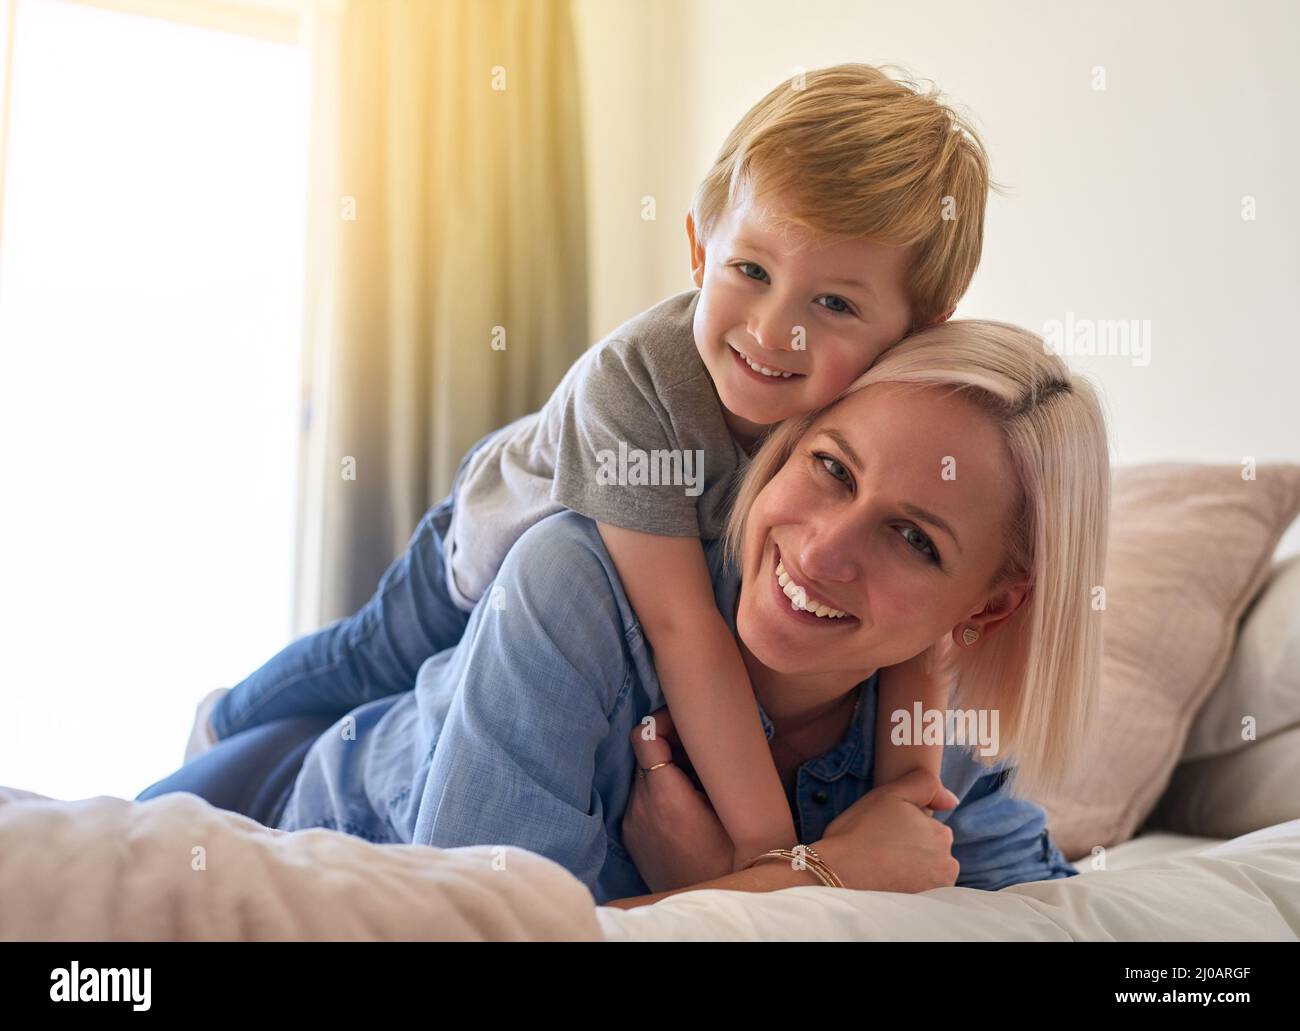 My world shines so much brighter because of him. Portrait of a mother and son spending some quality time together at home. Stock Photo